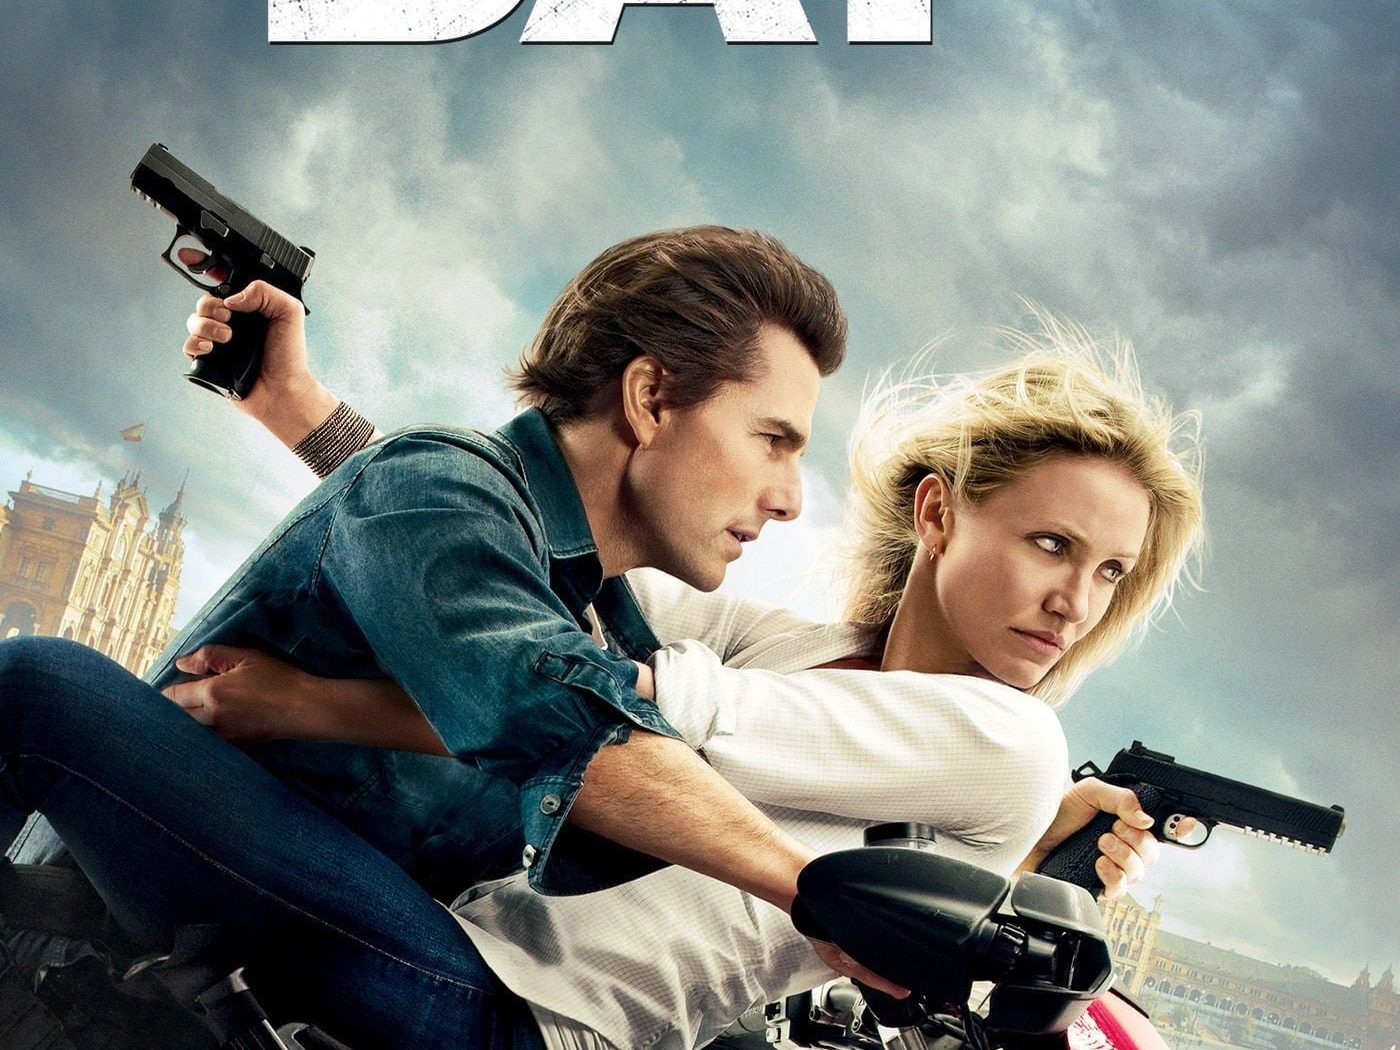 Poster for the movie "Knight and Day"